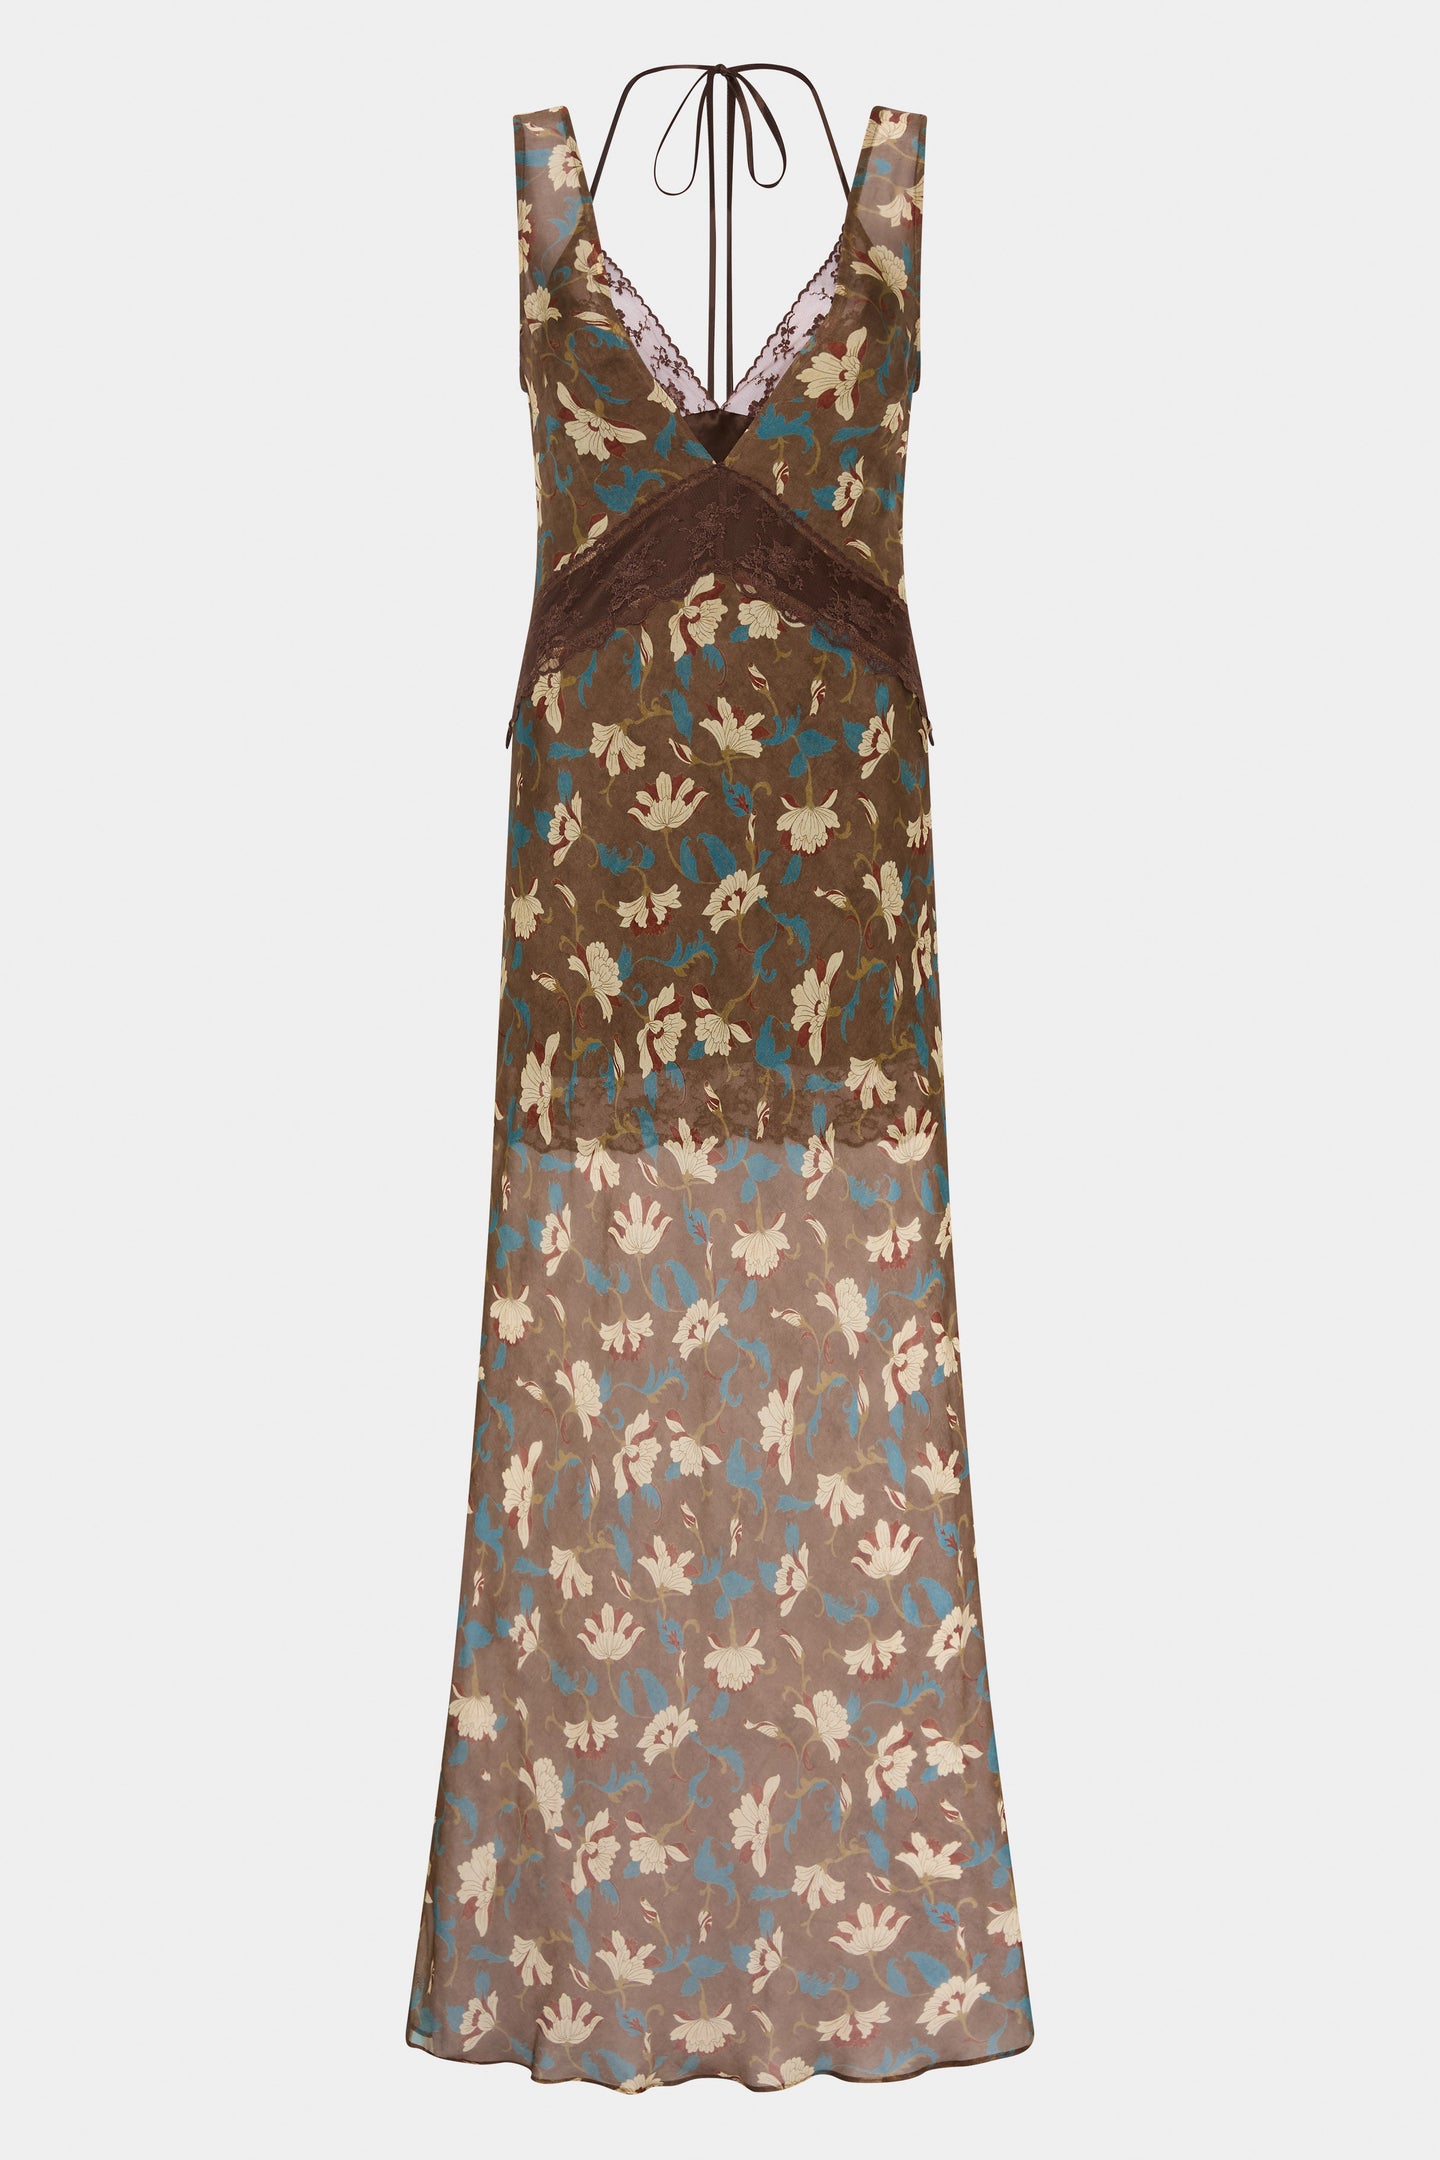 SIR the label Avellino Lace Layered Dress CHOCOLATE FIORE PRINT